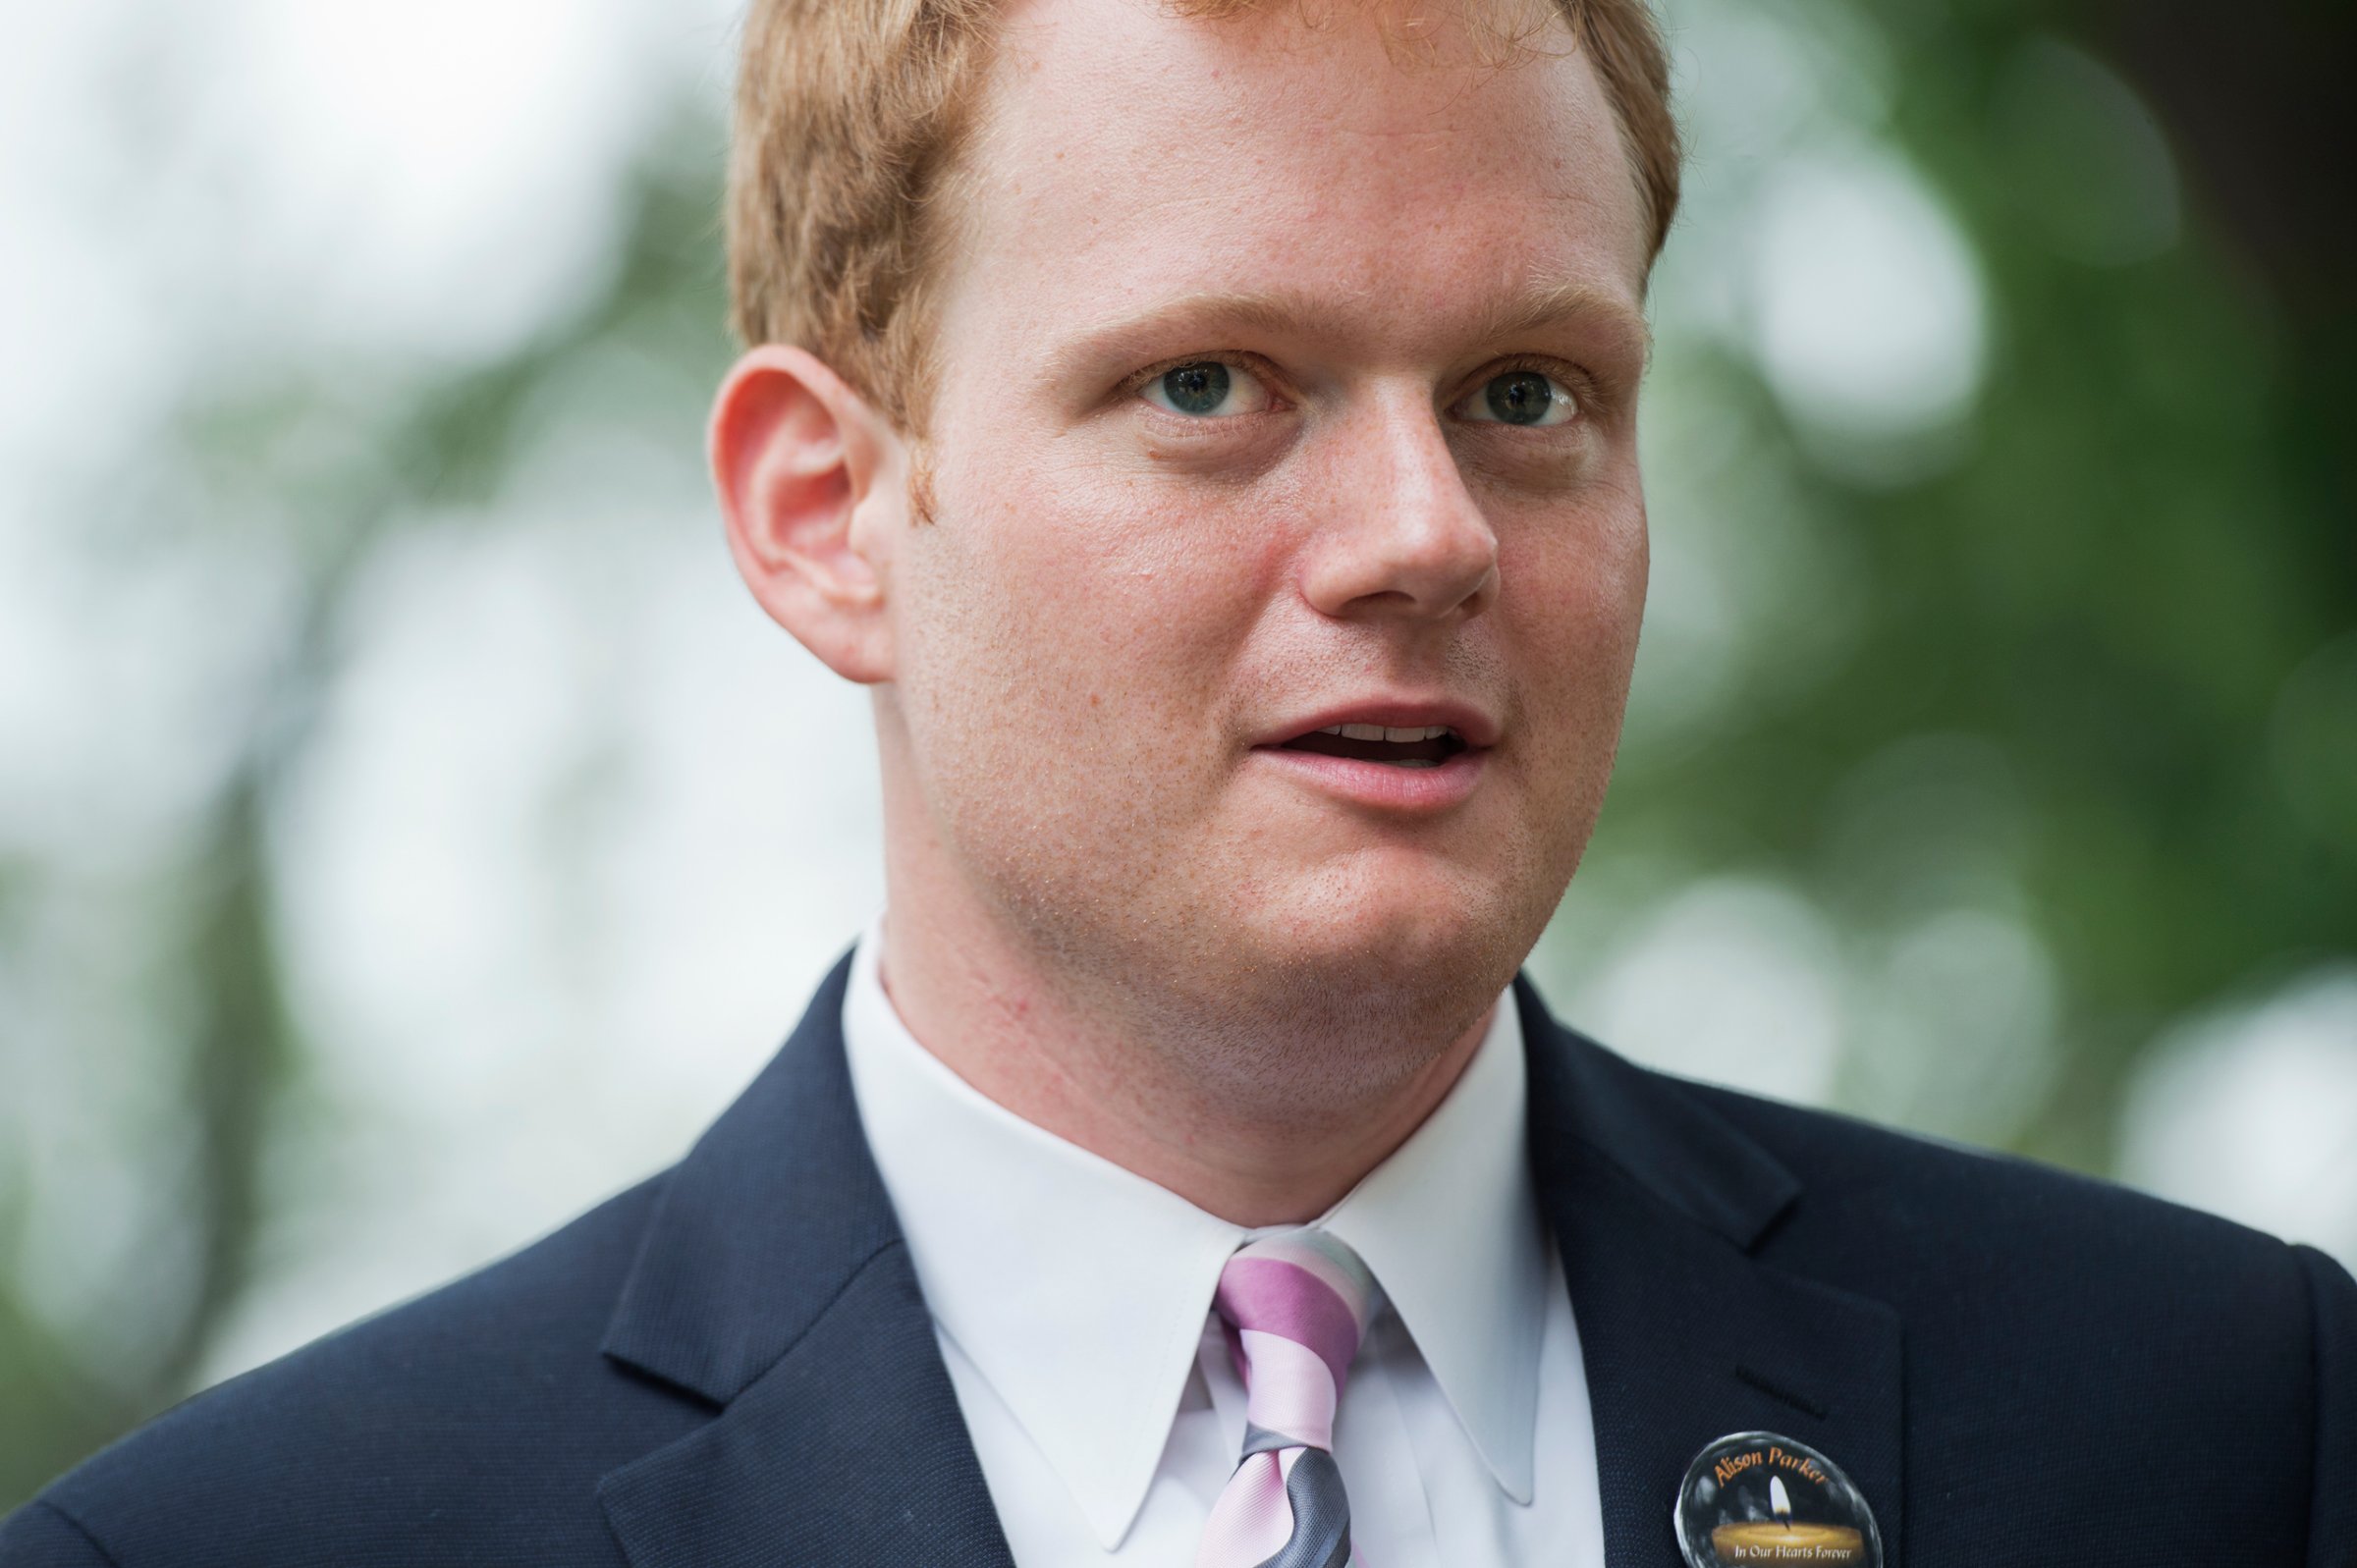 UNITED STATES - SEPTEMBER 10: Chris Hurst, whose girlfriend Alison Parker, a reporter for WDBJ-TV reporter, was killed on air last month, greets Gov. Terry McAuliffe, D-Va., during a rally on the East Front lawn of the Capitol to demand that Congress take action on gun control legislation, September 10, 2015. The event, titled #Whateverittakes Day of Action, was hosted by Everytown for Gun Safety and featured speeches by political leaders and families of gun violence victims. (Photo By Tom Williams/CQ Roll Call)